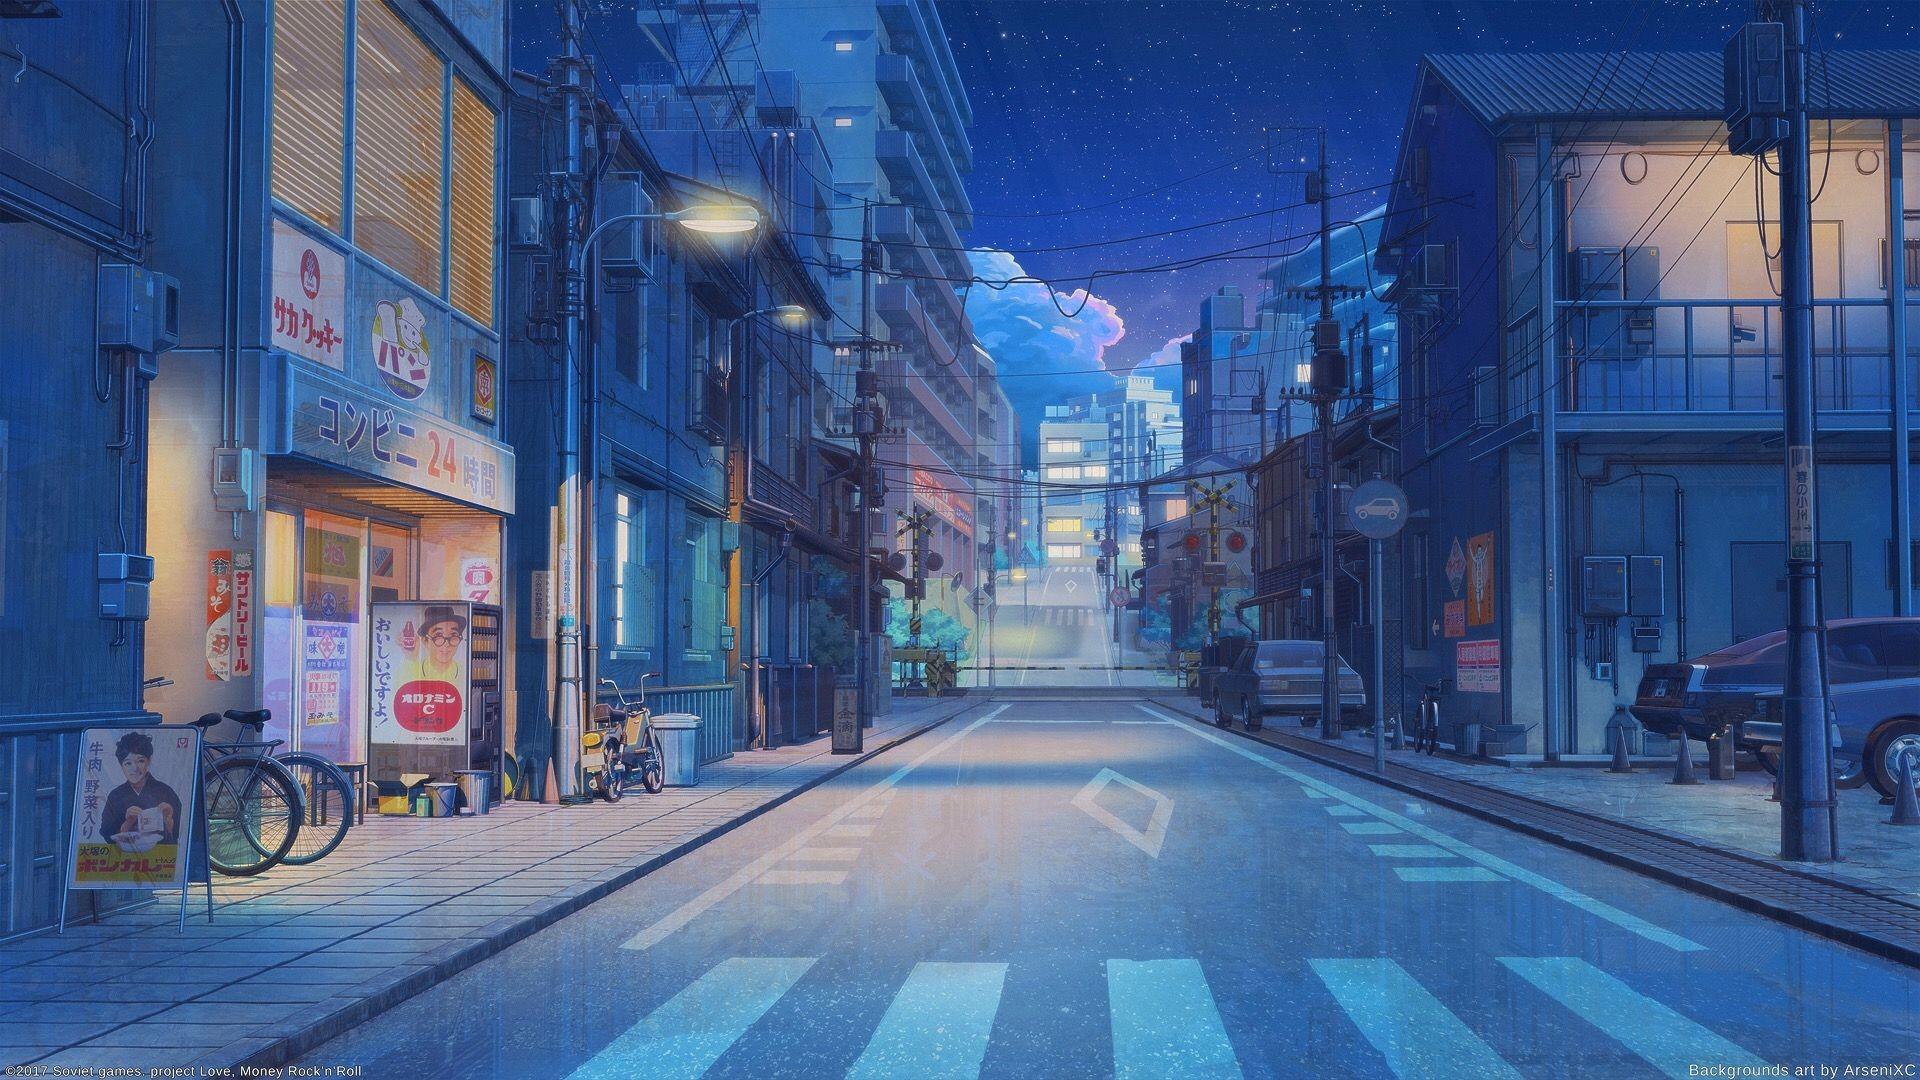 100+] Blue Anime Aesthetic Wallpapers | Wallpapers.com